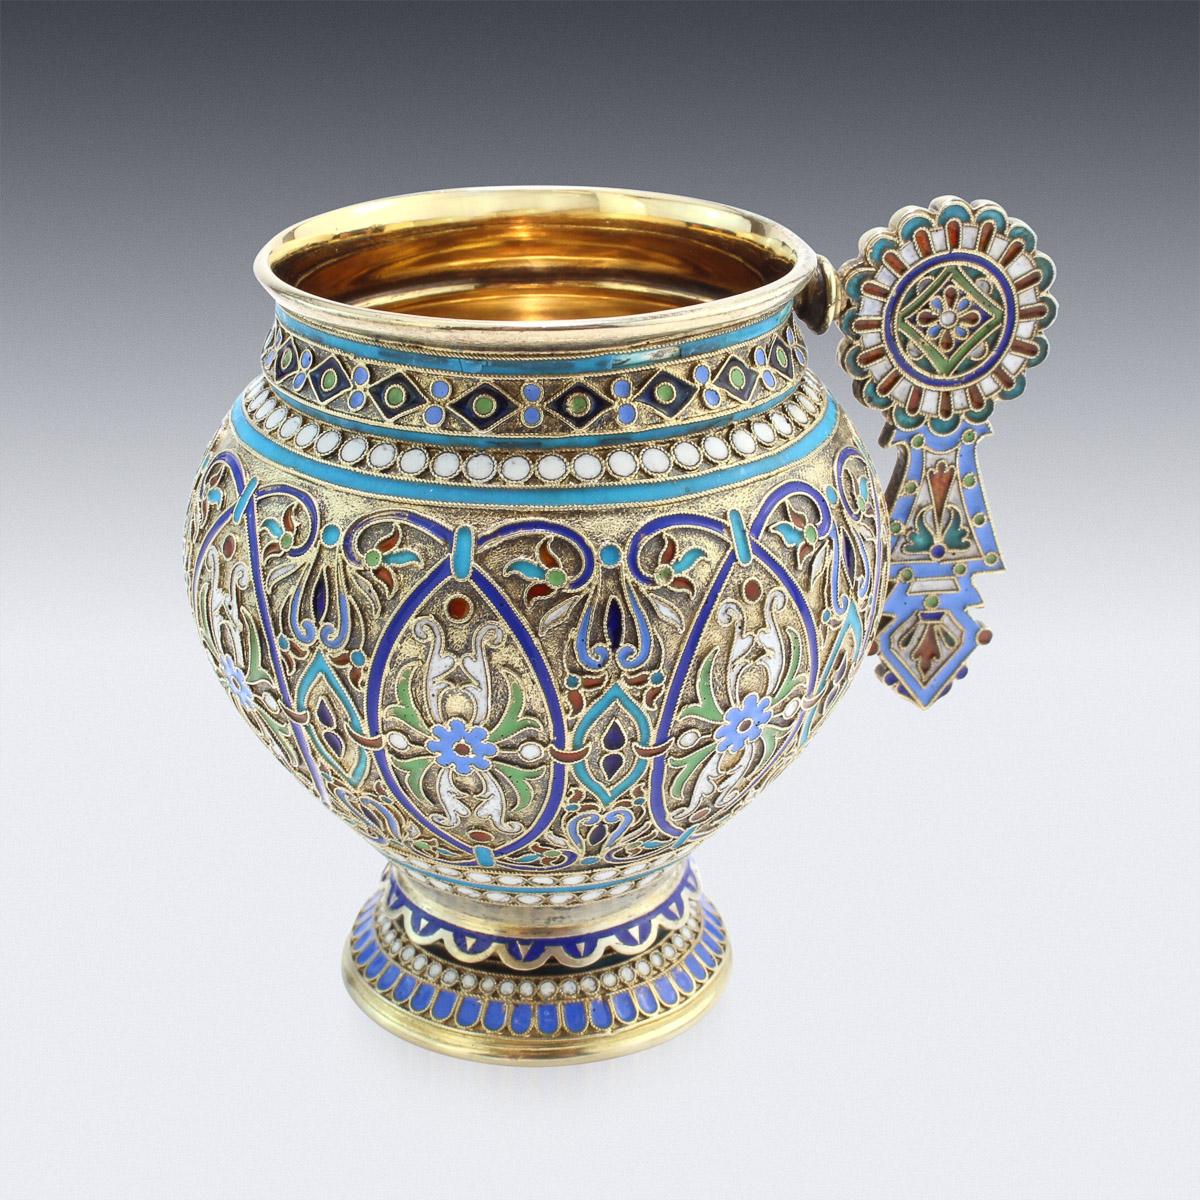 Cloissoné 19th Century Imperial Russian Solid Silver-Gilt & Enamel Cup on Saucer, c.1887